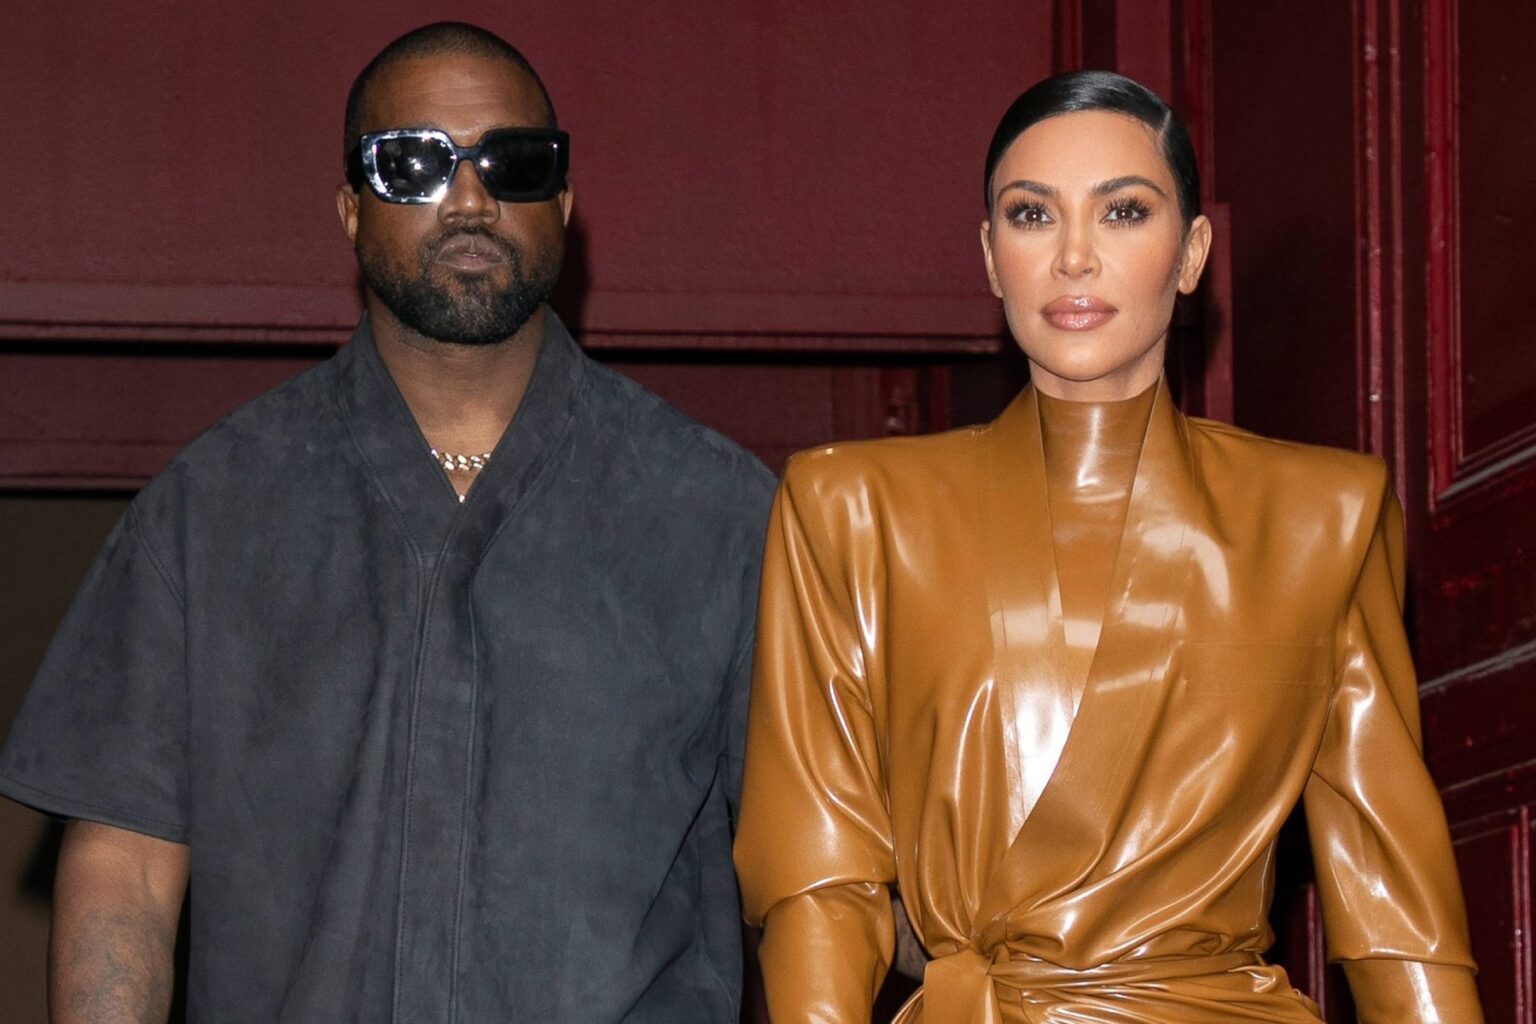 Following his split with Kim Kardashian, people have speculated about Kanye West's net worth. But did he spend a bulk of it on sneakers? See for yourself.